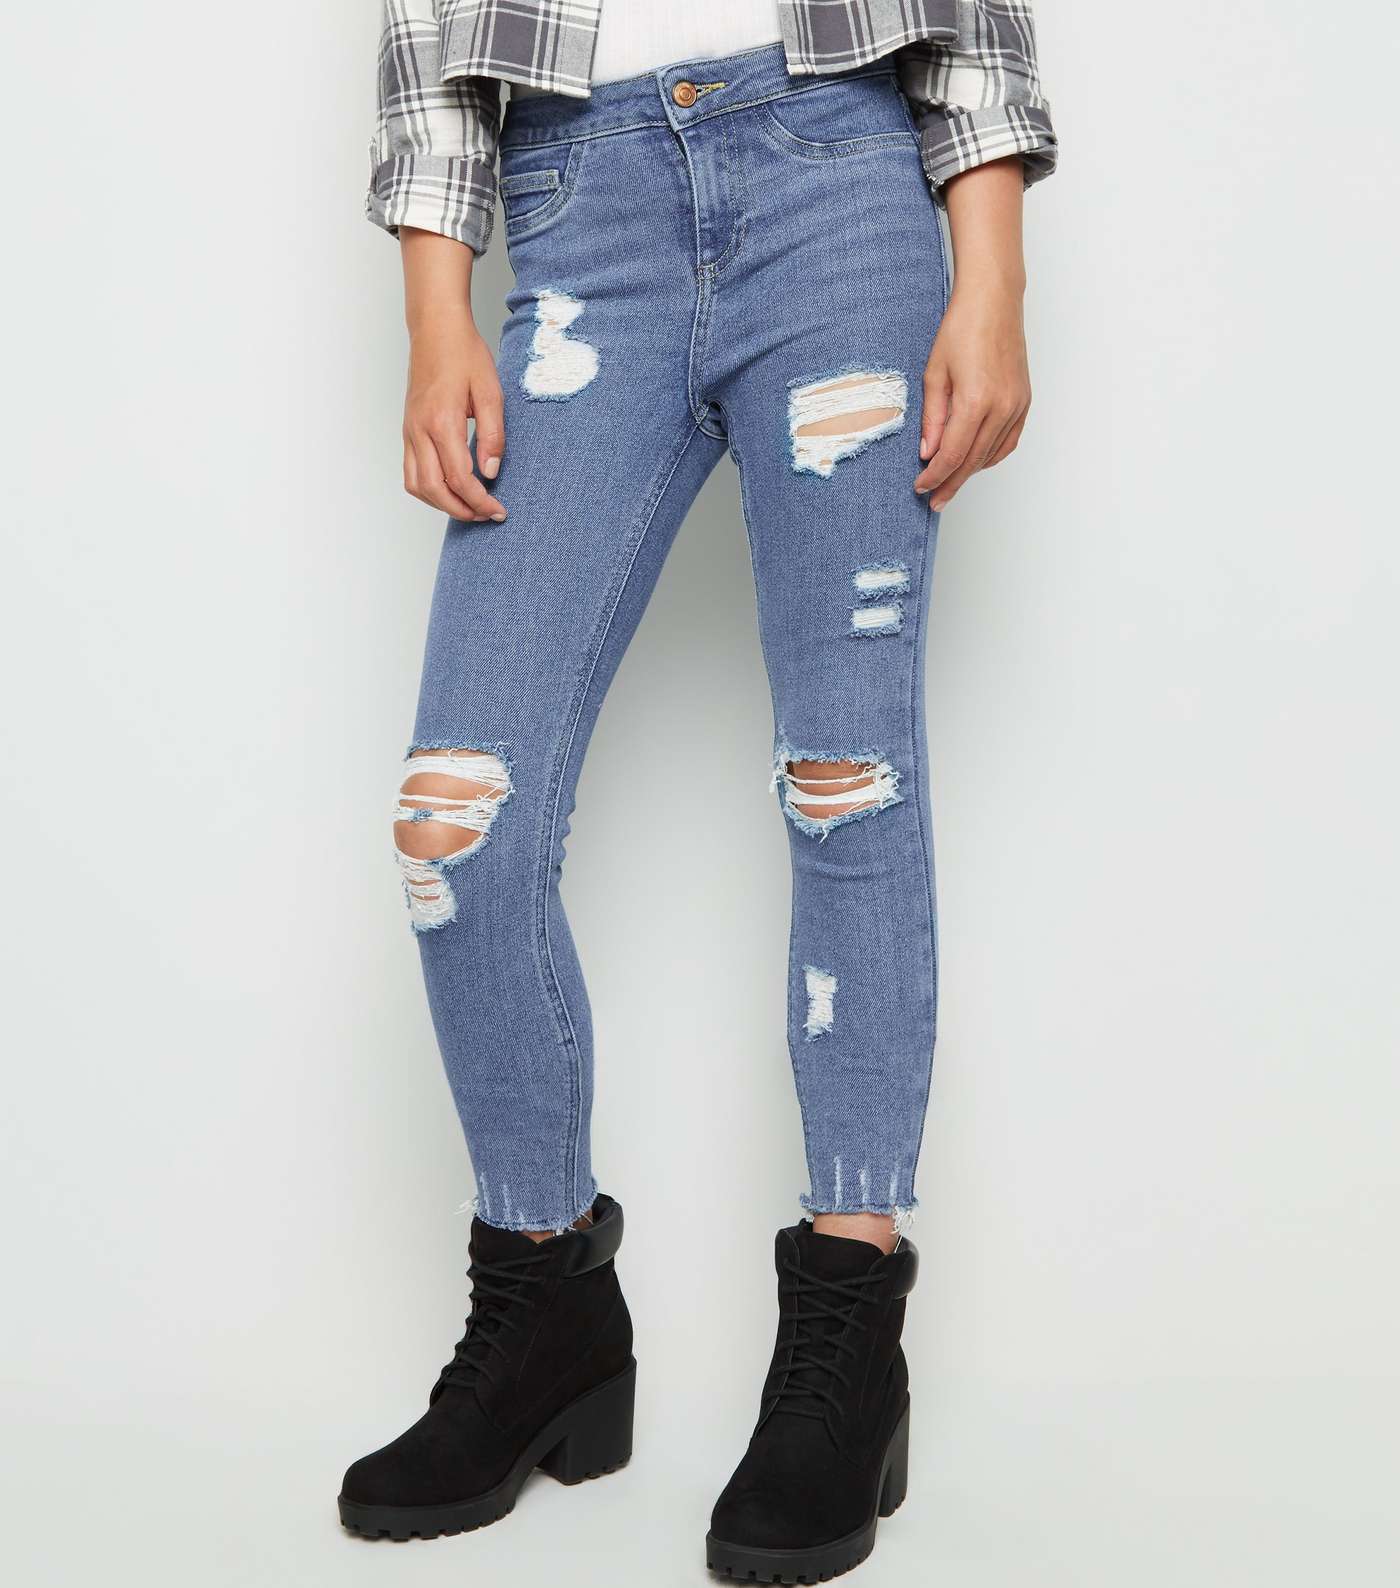 Girls Blue Ripped High Waist Super Skinny Jeans Image 2